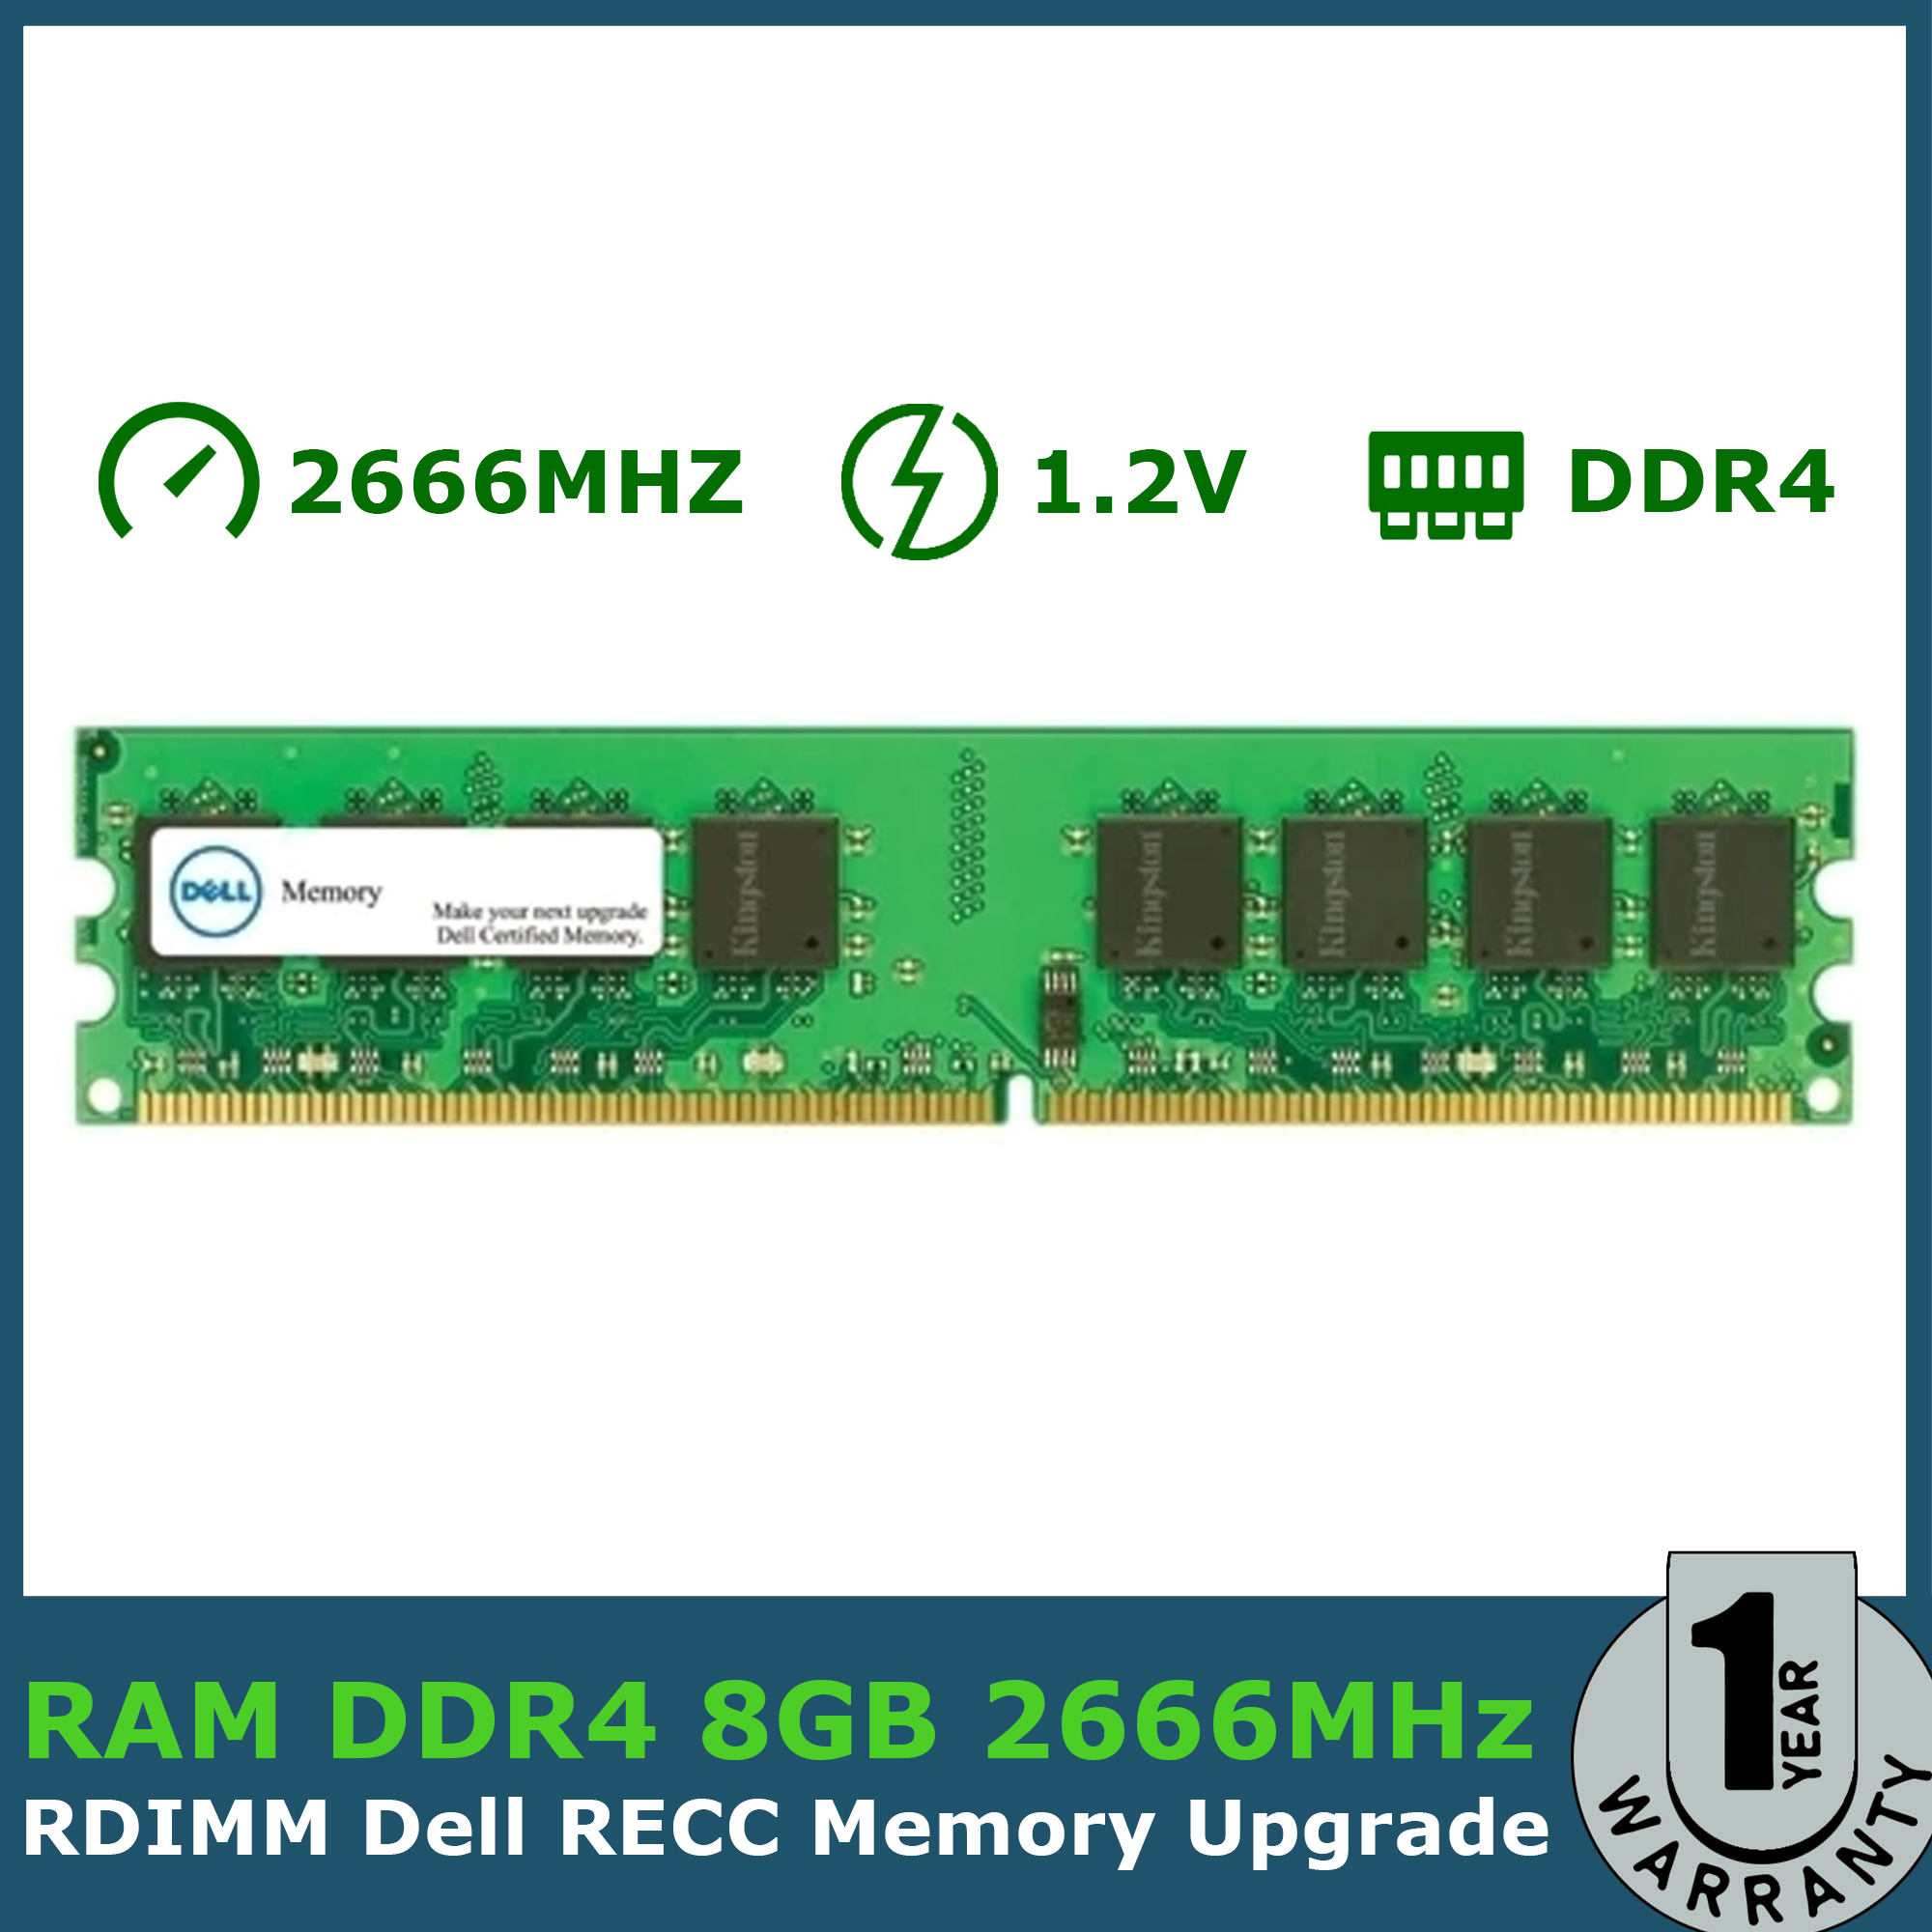 RAM DDR4 8GB RECC 2666MHz│Dell Memory Upgrade│Registered & Upgrade Types System Specific│RDIMM Dell RAM RECC│Server Memory│Data Storage│For T40│T150│T140│T340│T440│T640│R240│R250│R350│R440│R540│R640│R740│ | Lazada PH